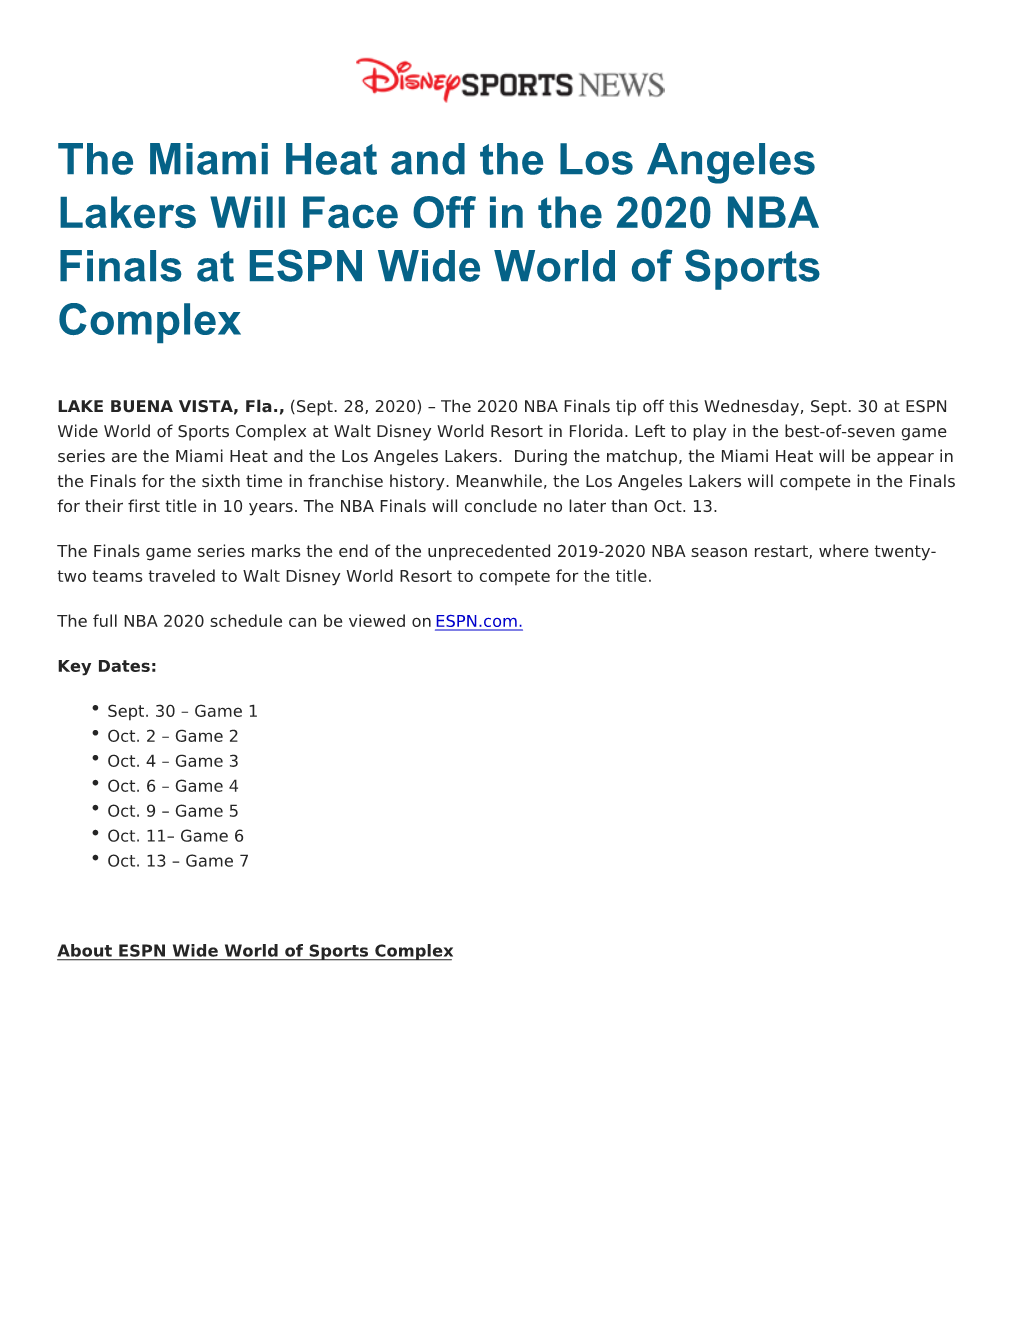 The Miami Heat and the Los Angeles Lakers Will Face Off in the 2020 NBA Finals at ESPN Wide World of Sports Complex